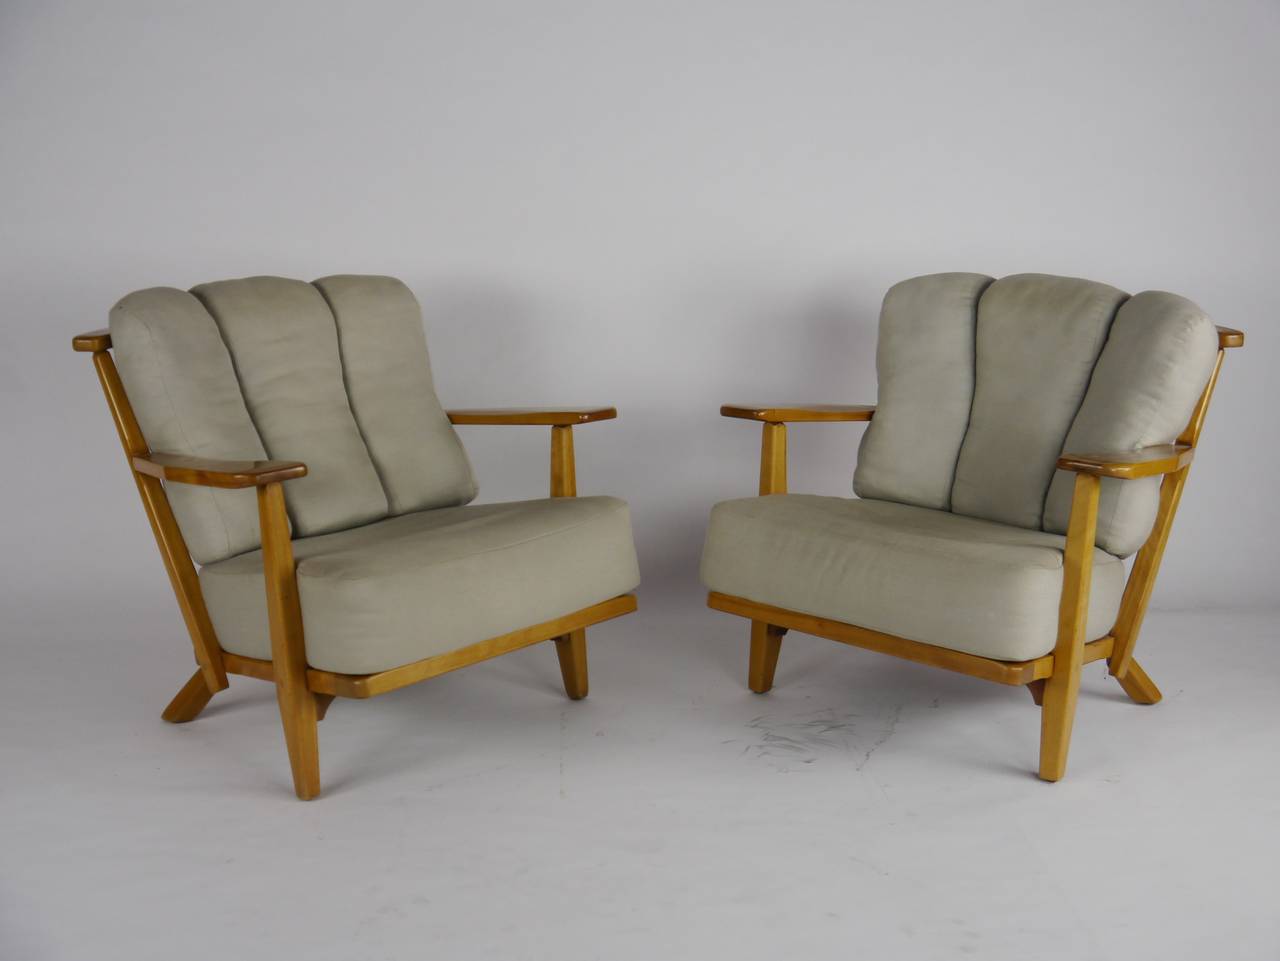 Unusual lounge chairs by Cushman, having Mid-Century styling, maple frames, original loose cushion upholstery and paddle arms.